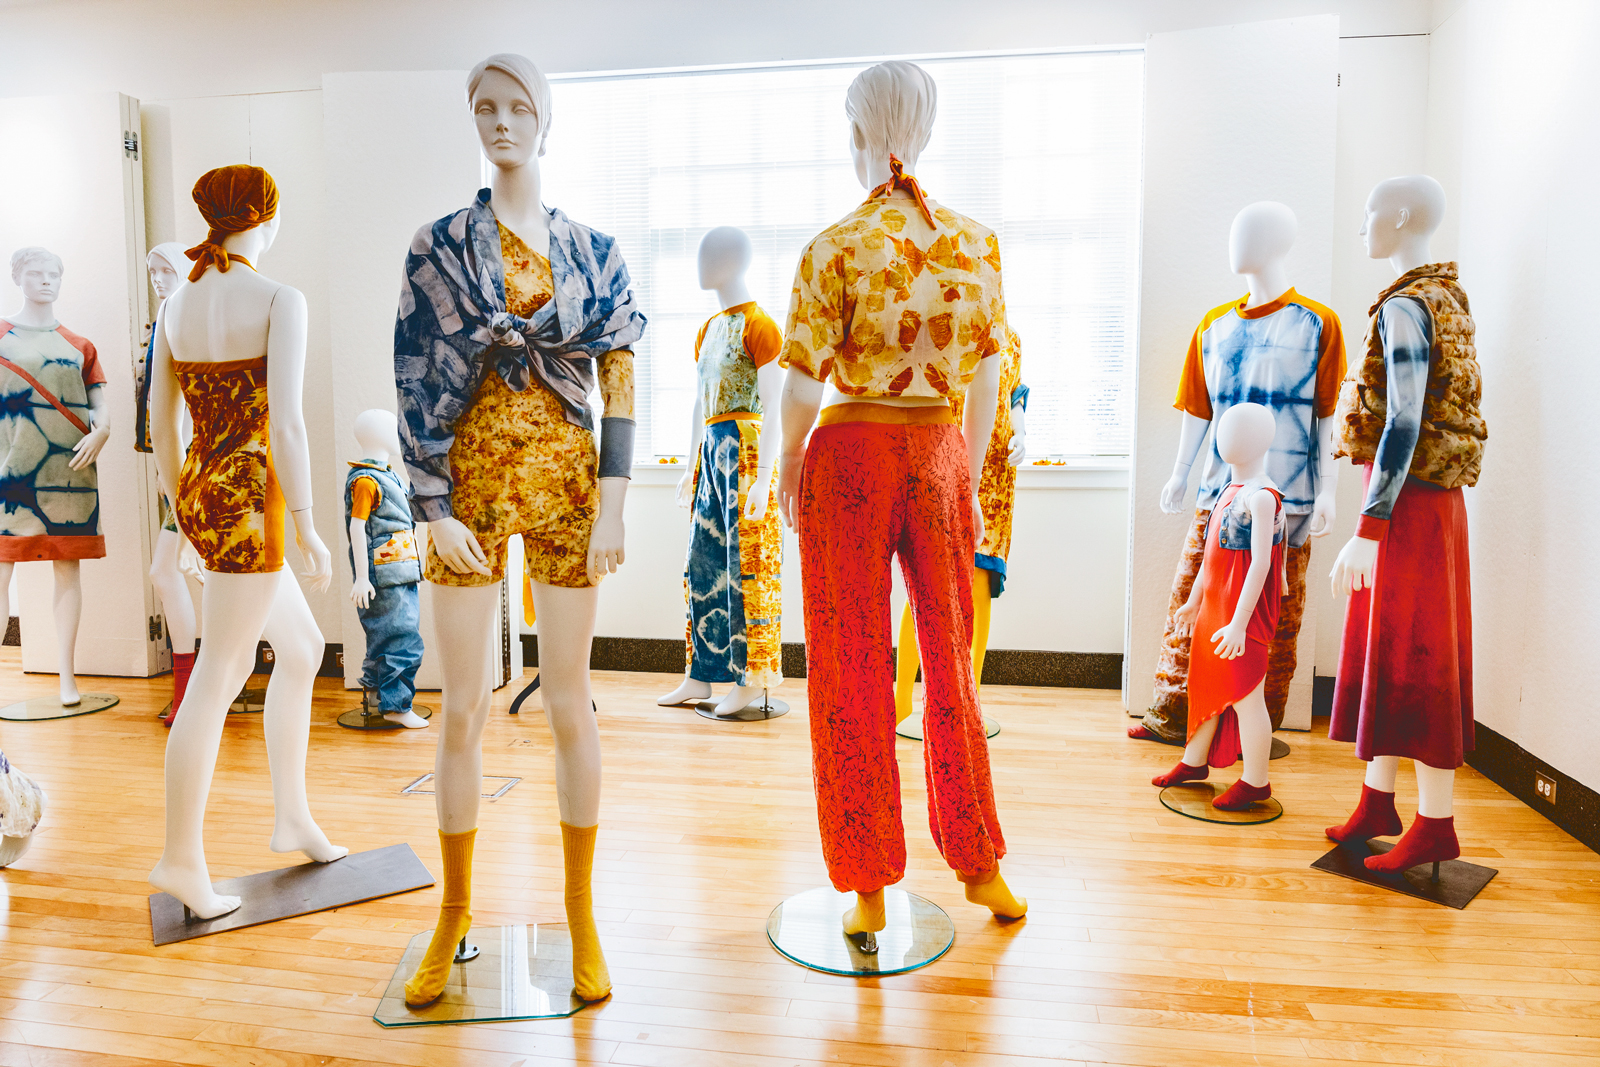 Mannequins arranged in a room wearing brightly colored clothing